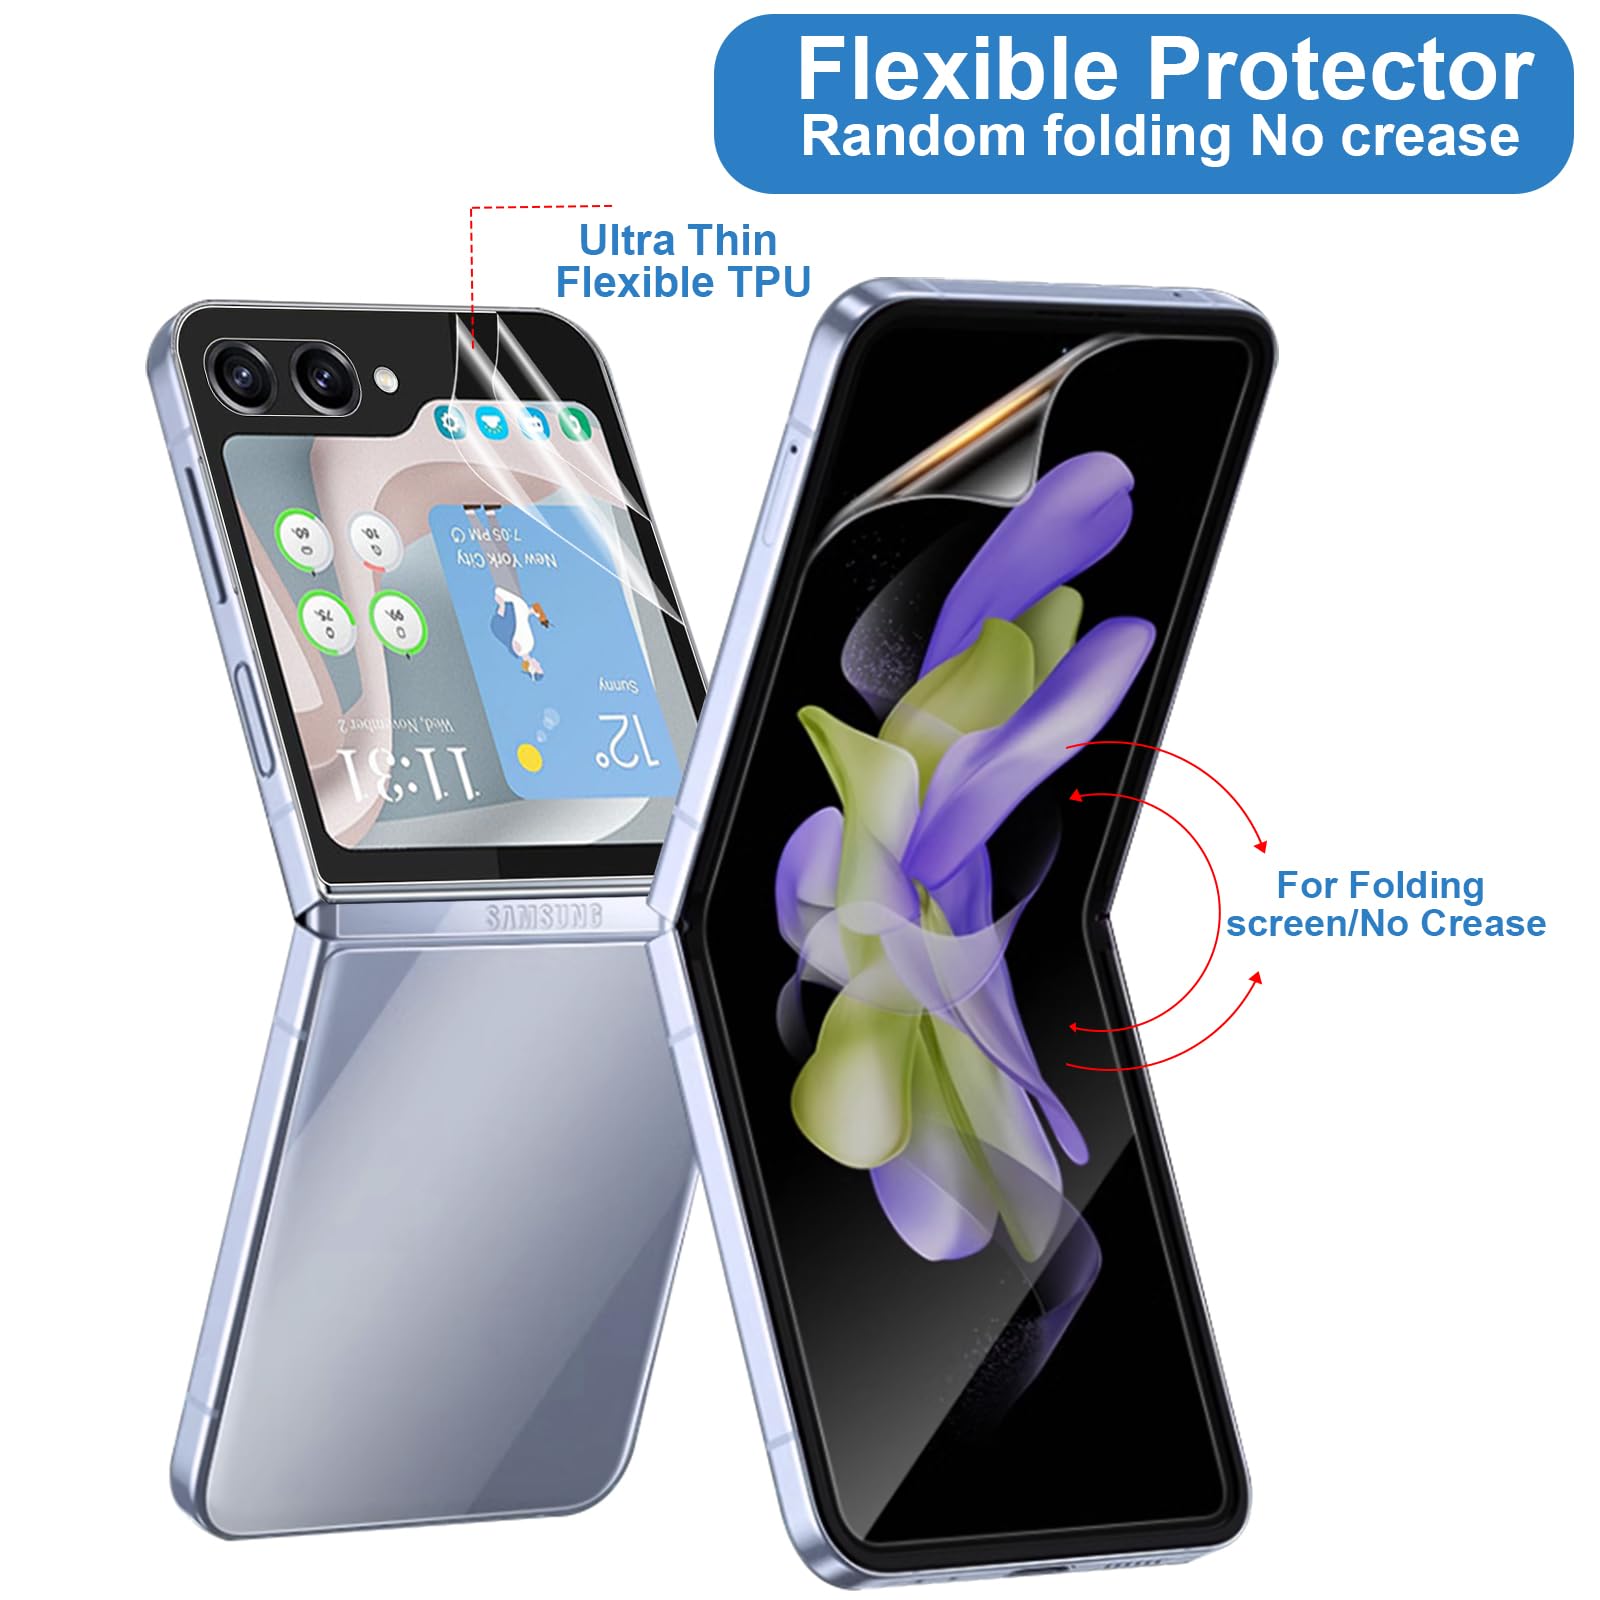 Film Flexible That Protection All the Screen And One Rear for